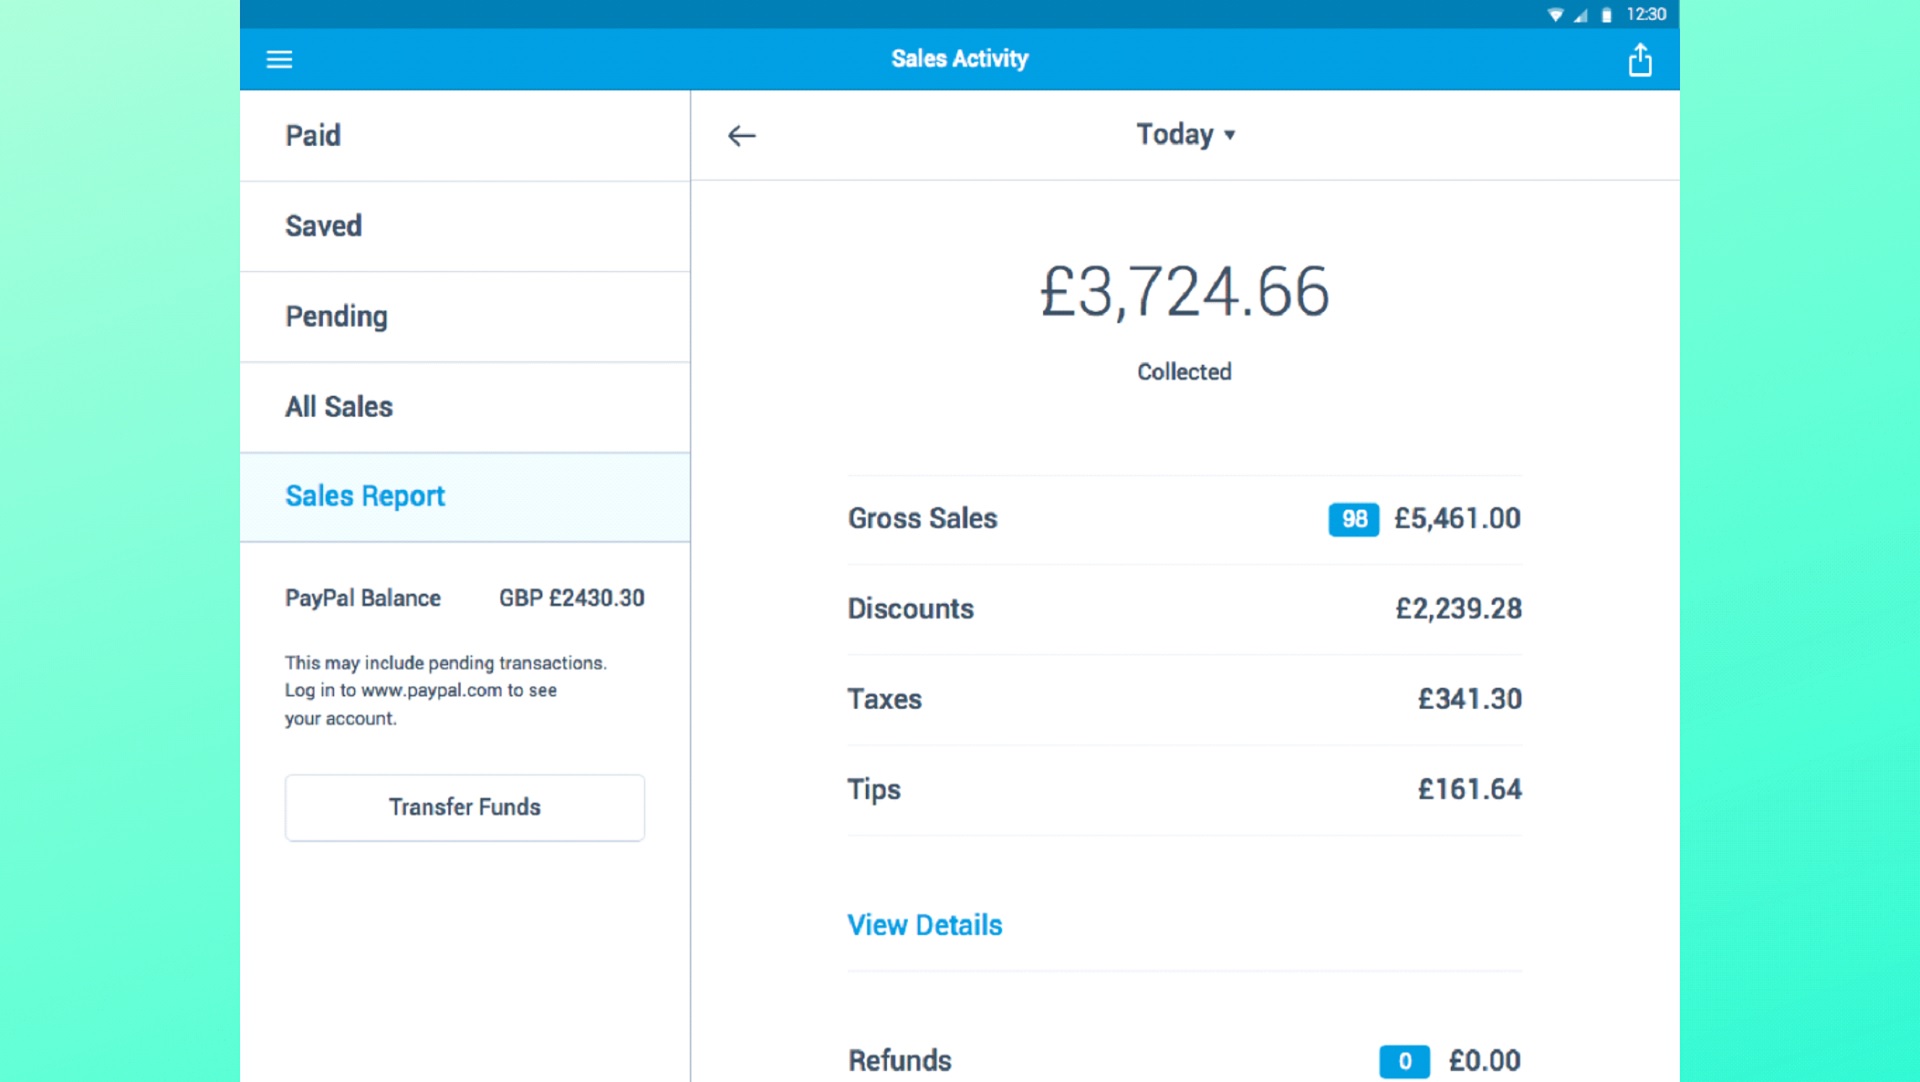 PayPal HERE Sales Activity Interface